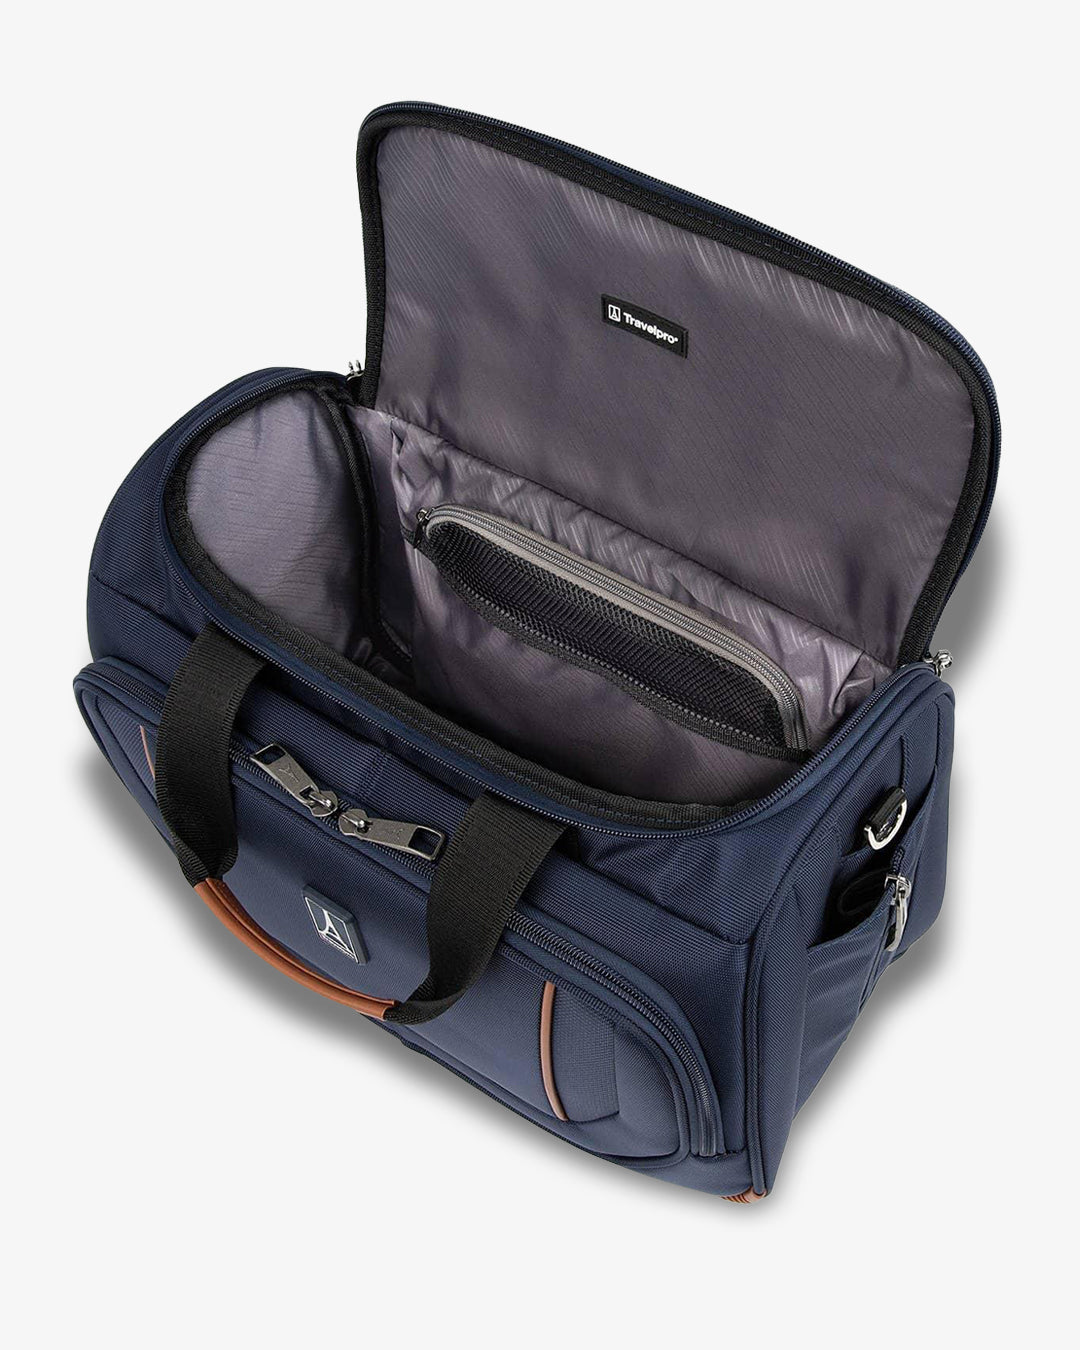 Travelpro Crew™ VersaPack™ Carry-On Deluxe Tote Bag